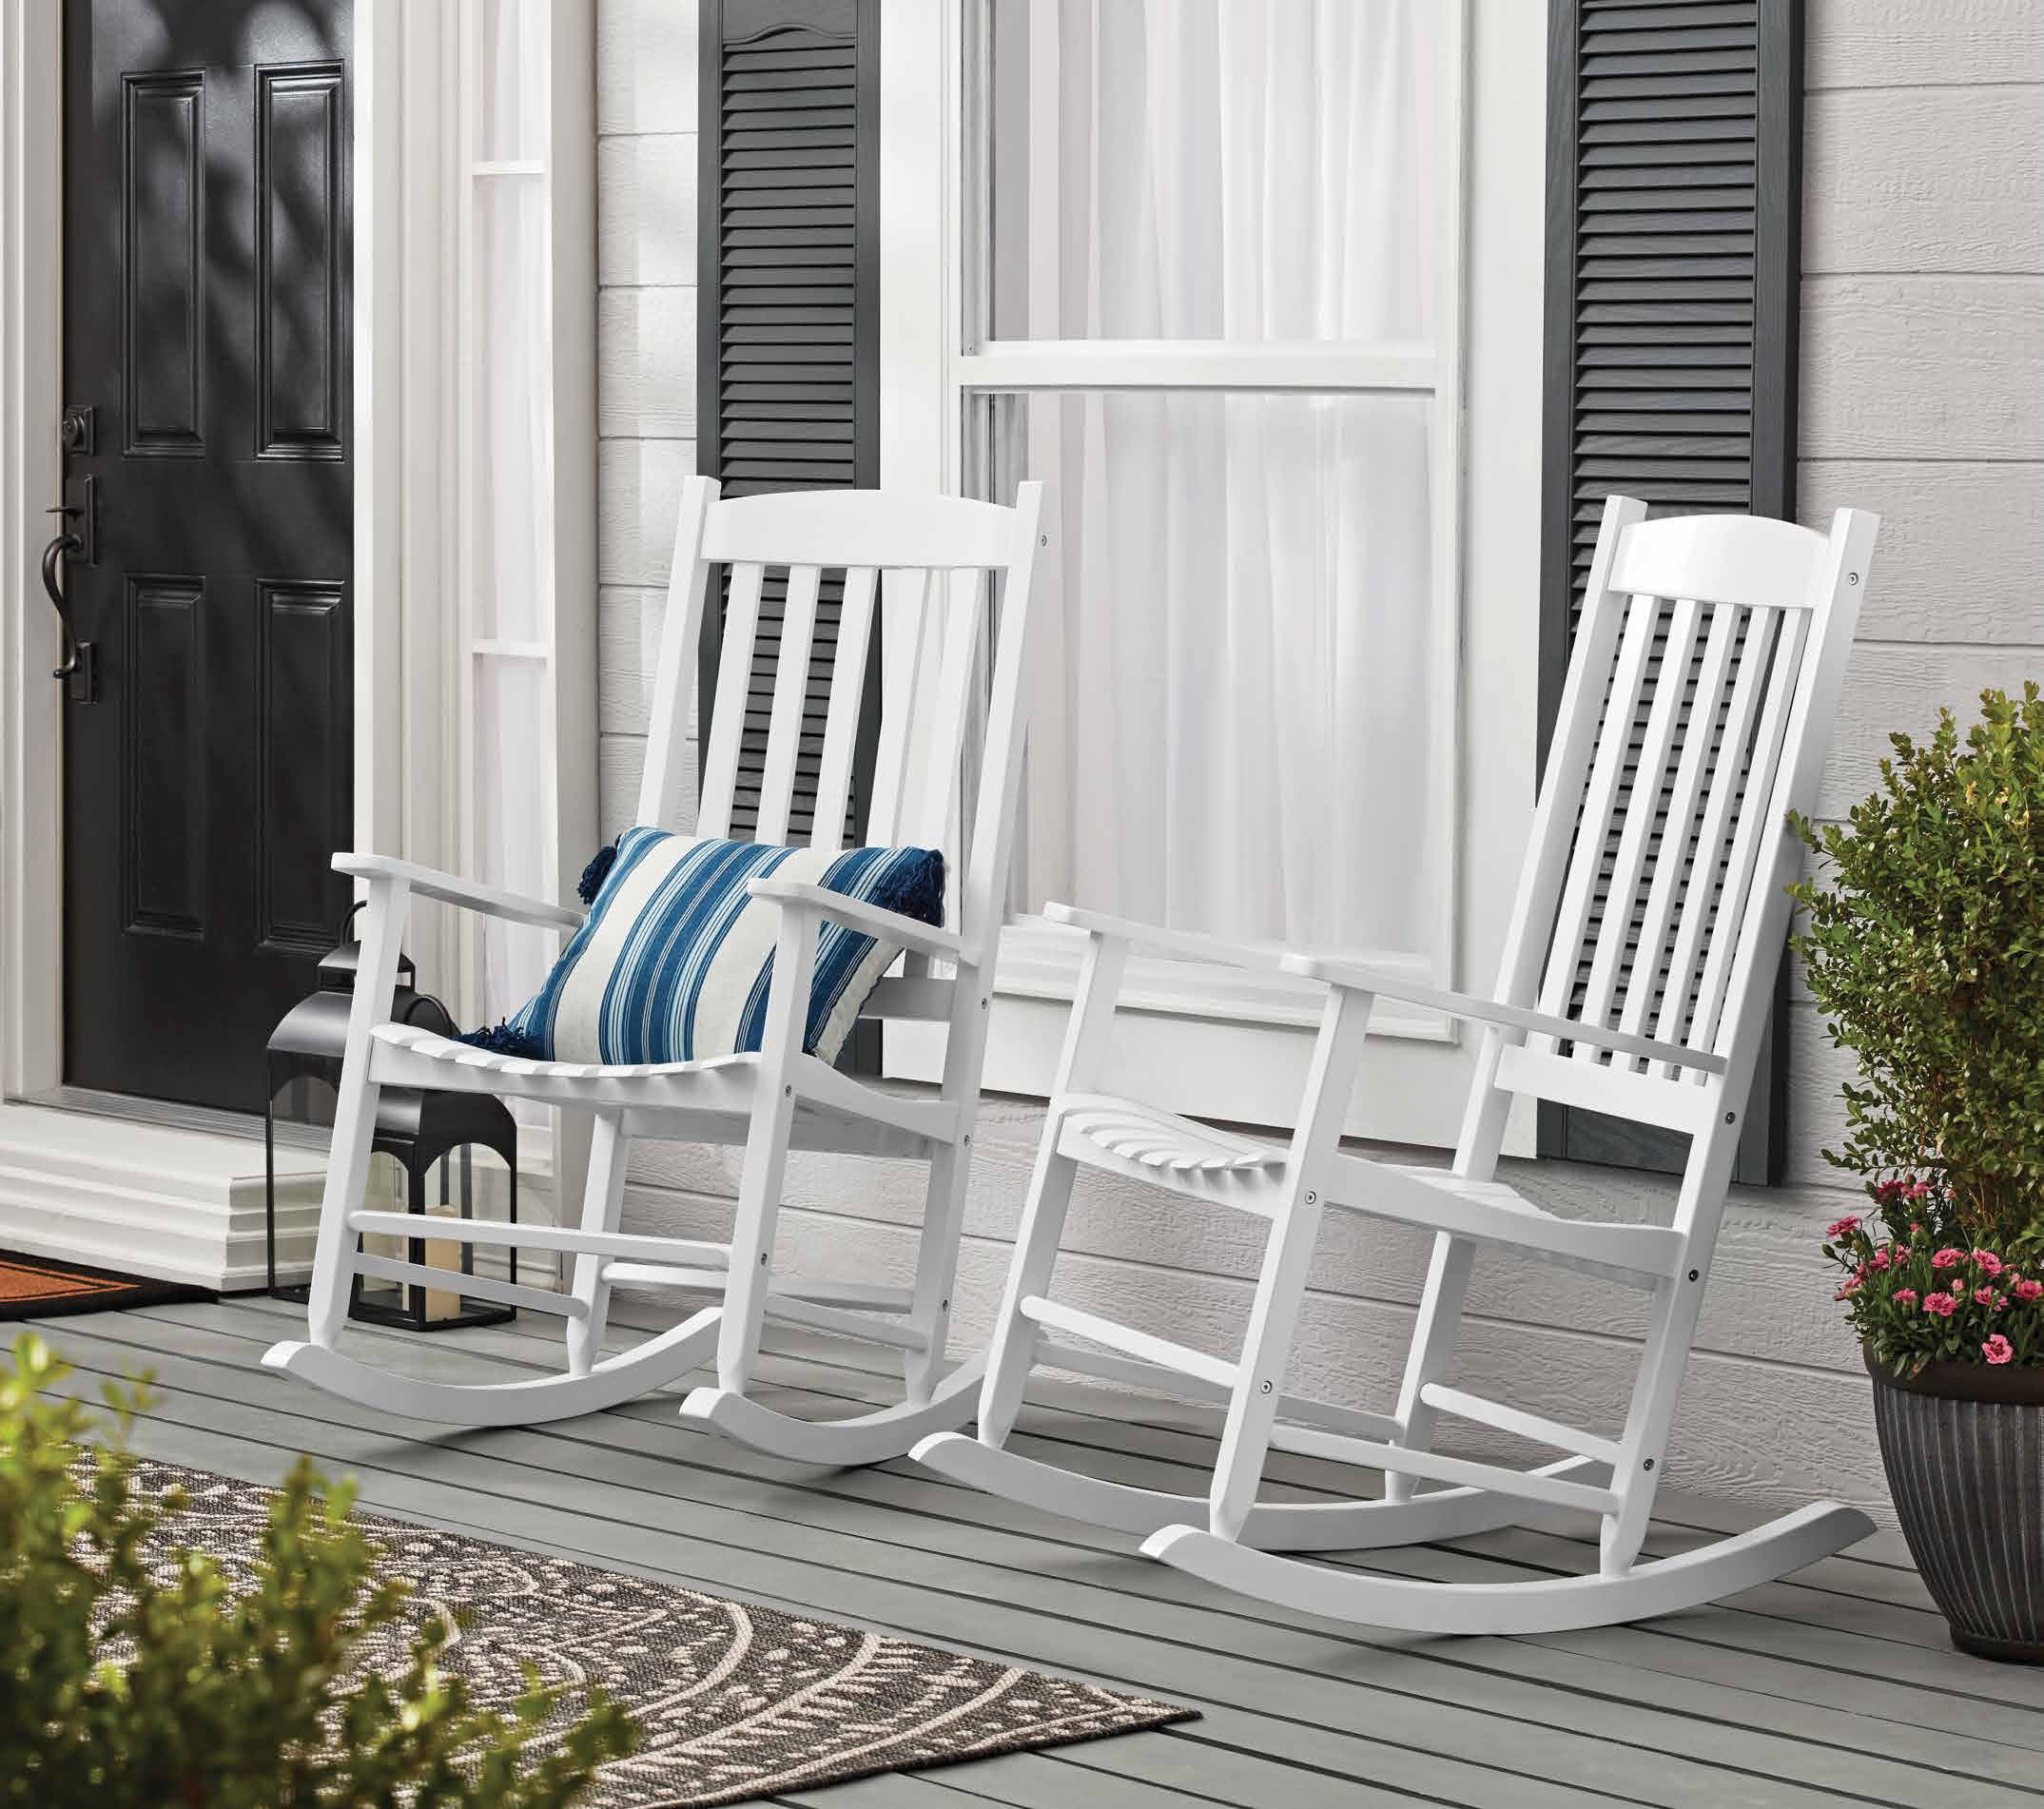 Solid Wood Slat Outdoor Rocking Chair Patio Porch Deck Chair Classic High Back 